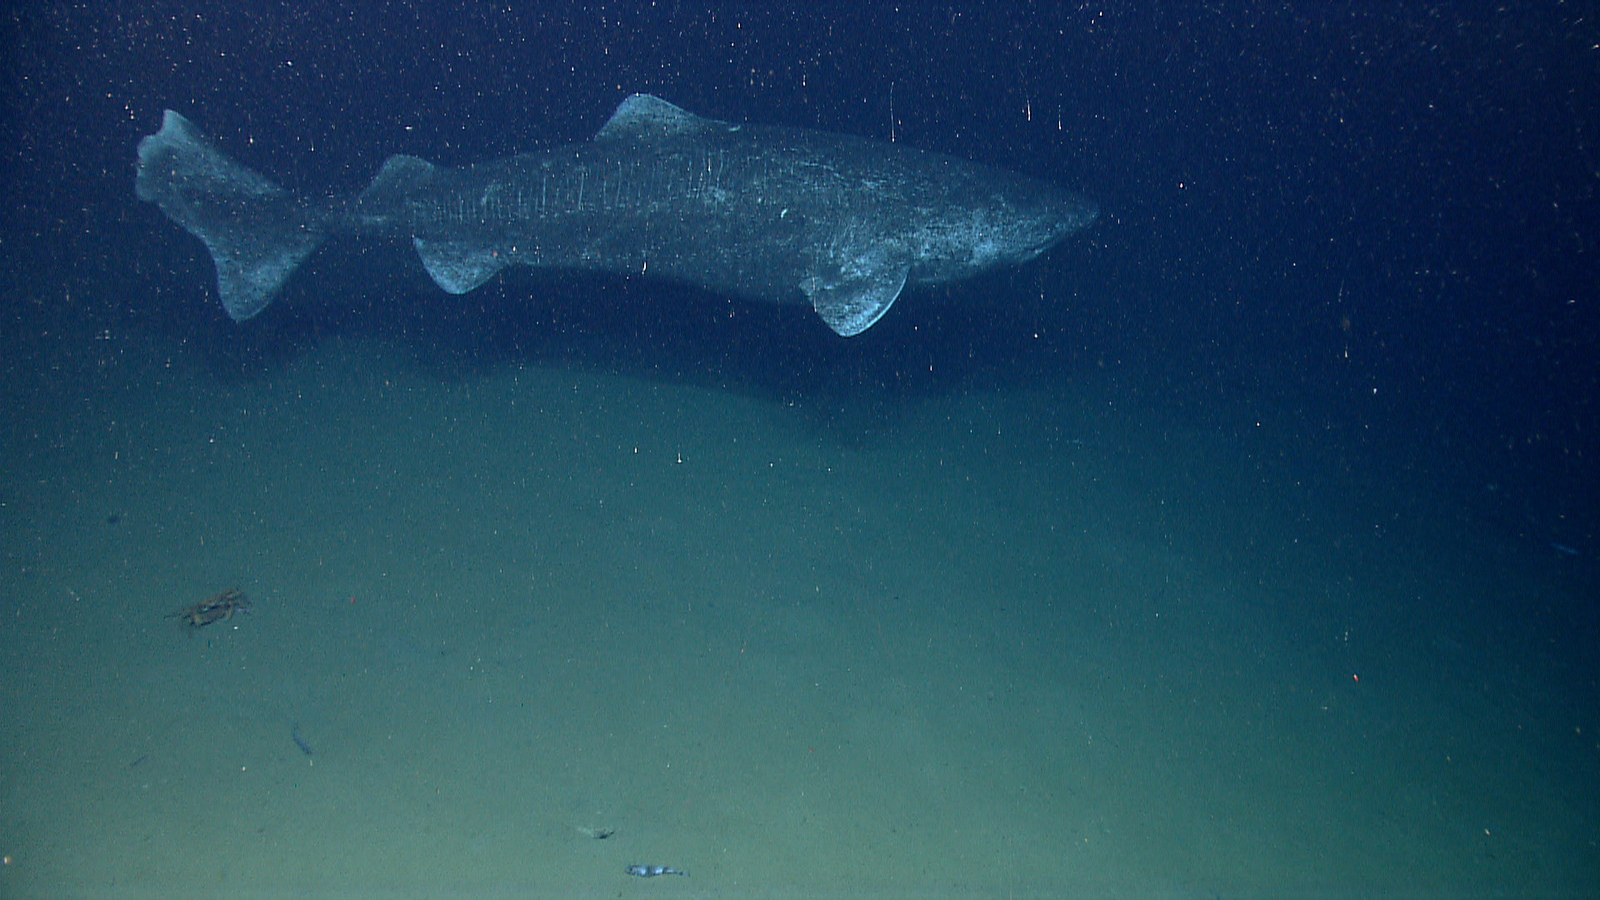 Sexual maturity doesn't reach its peak for Female Greenland Sharks until they're way over a hundred.
But that's not a problem for the females of these species given that most of them have a life span of at least 4 centuries. So reaching their sexual maturity at 150 must be like 13 in human years.